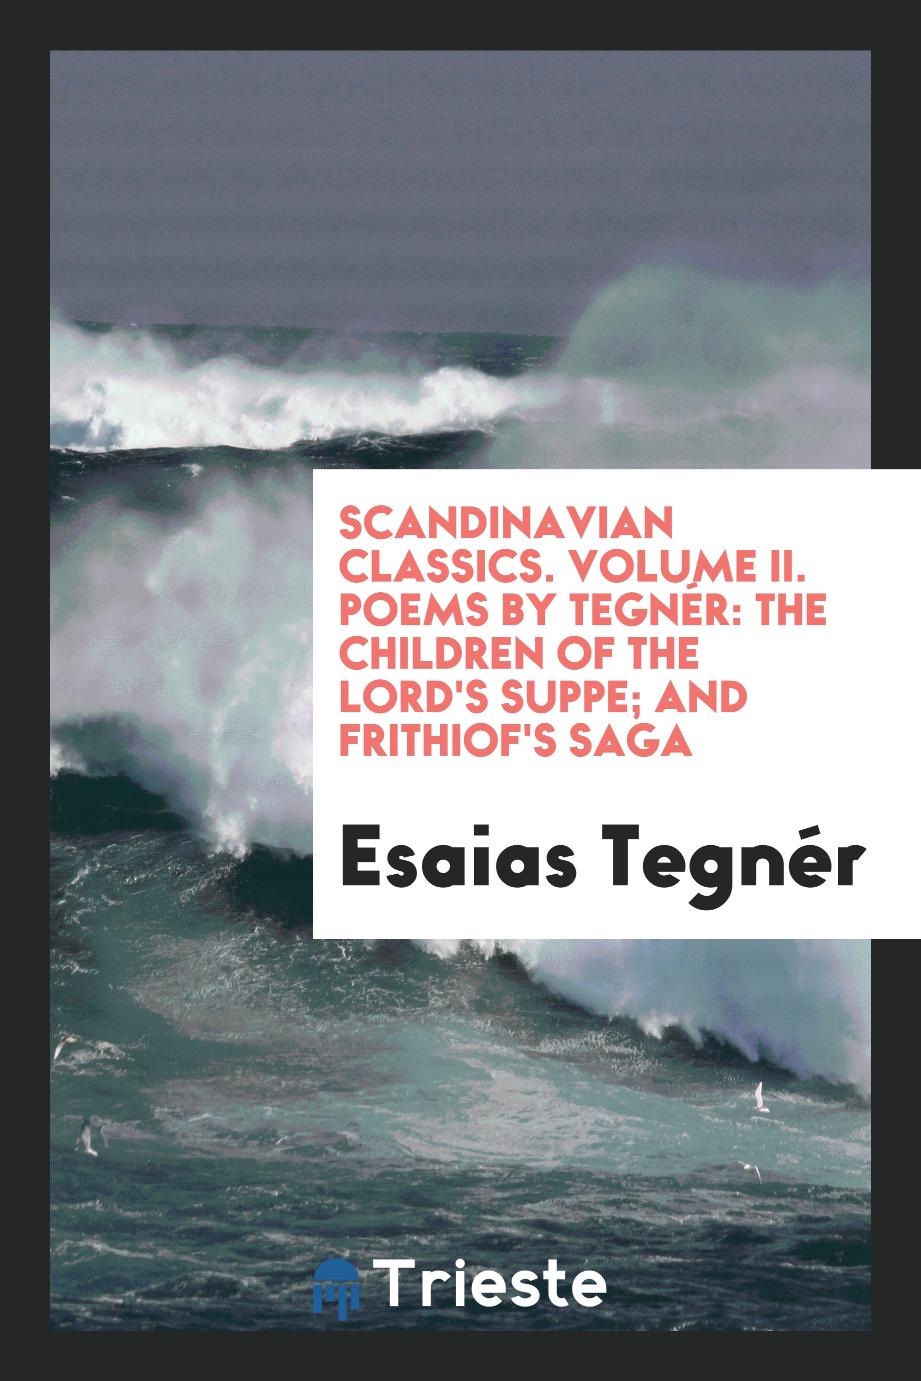 Scandinavian classics. Volume II. Poems by Tegnér: The children of the Lord's suppe; And Frithiof's saga